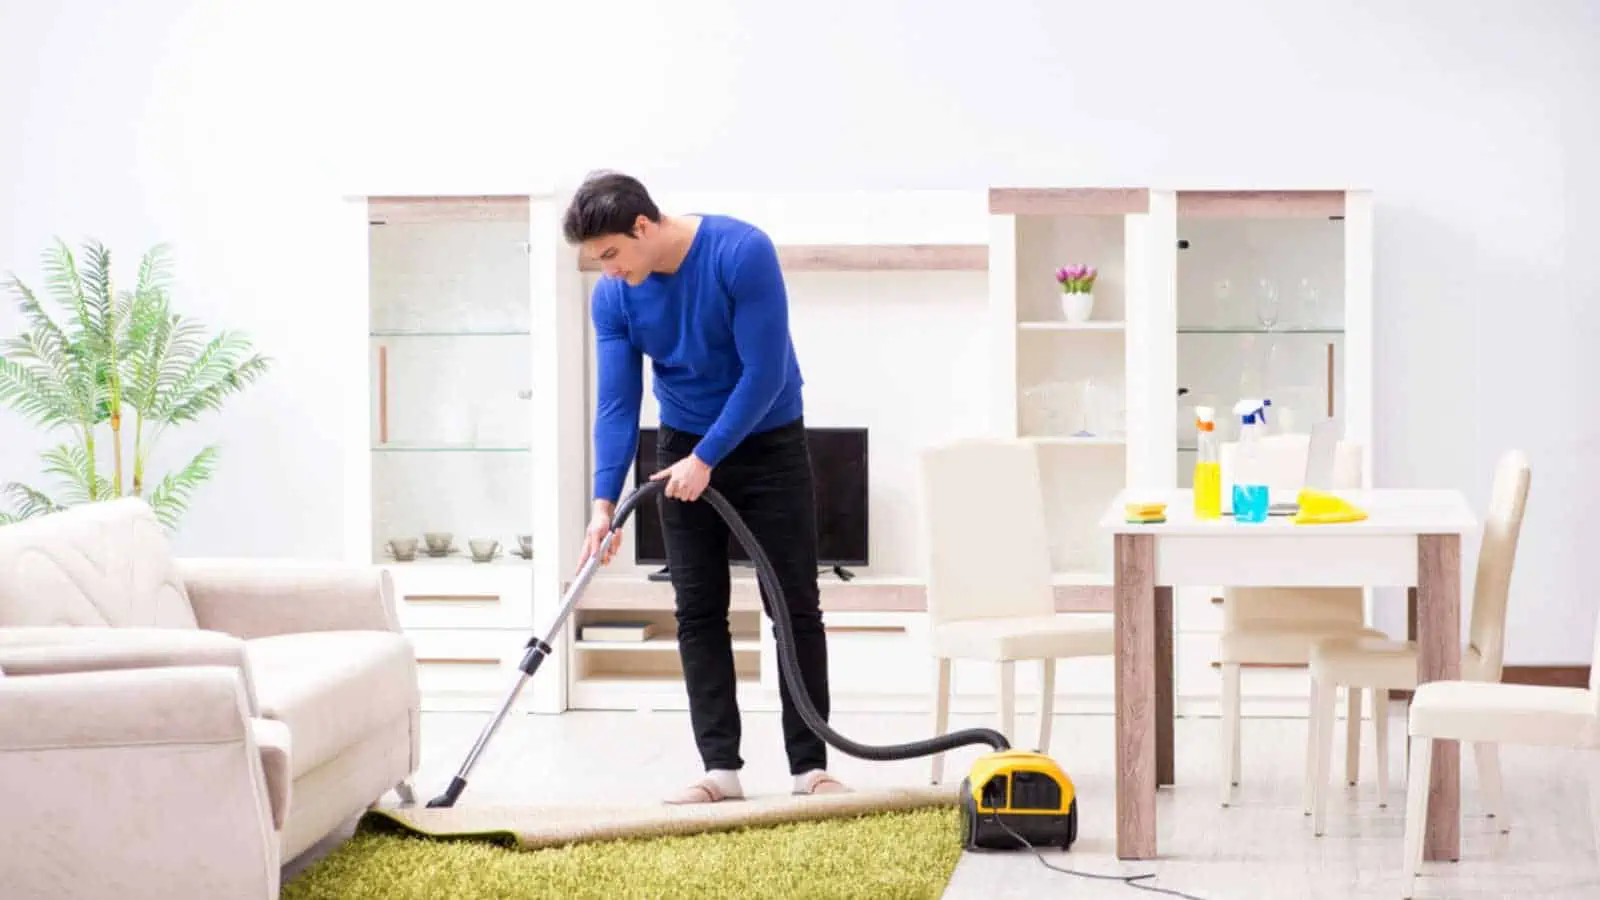 Man cleaning.